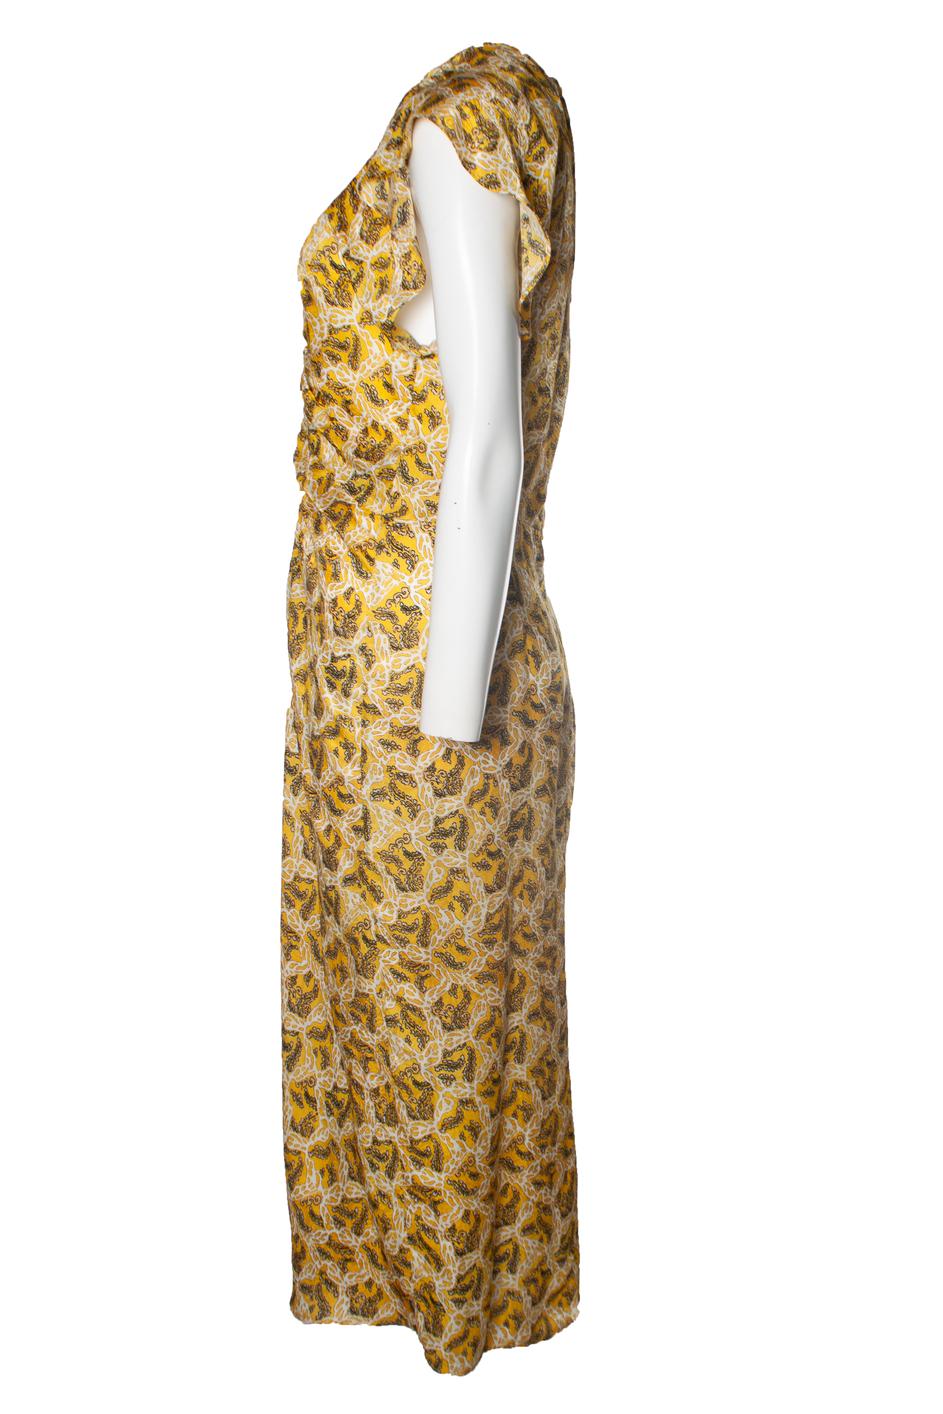 Isabel Marant, Yellow Lyndsay maxi dress with floral print. The item is in very good condition.

• CONDITION: very good condition 

• SIZE: FR40 - M 

• MEASUREMENTS: length 121 cm, width 40 cm, waist 38 cm, shoulder width 42 cm

• MATERIAL: 65%